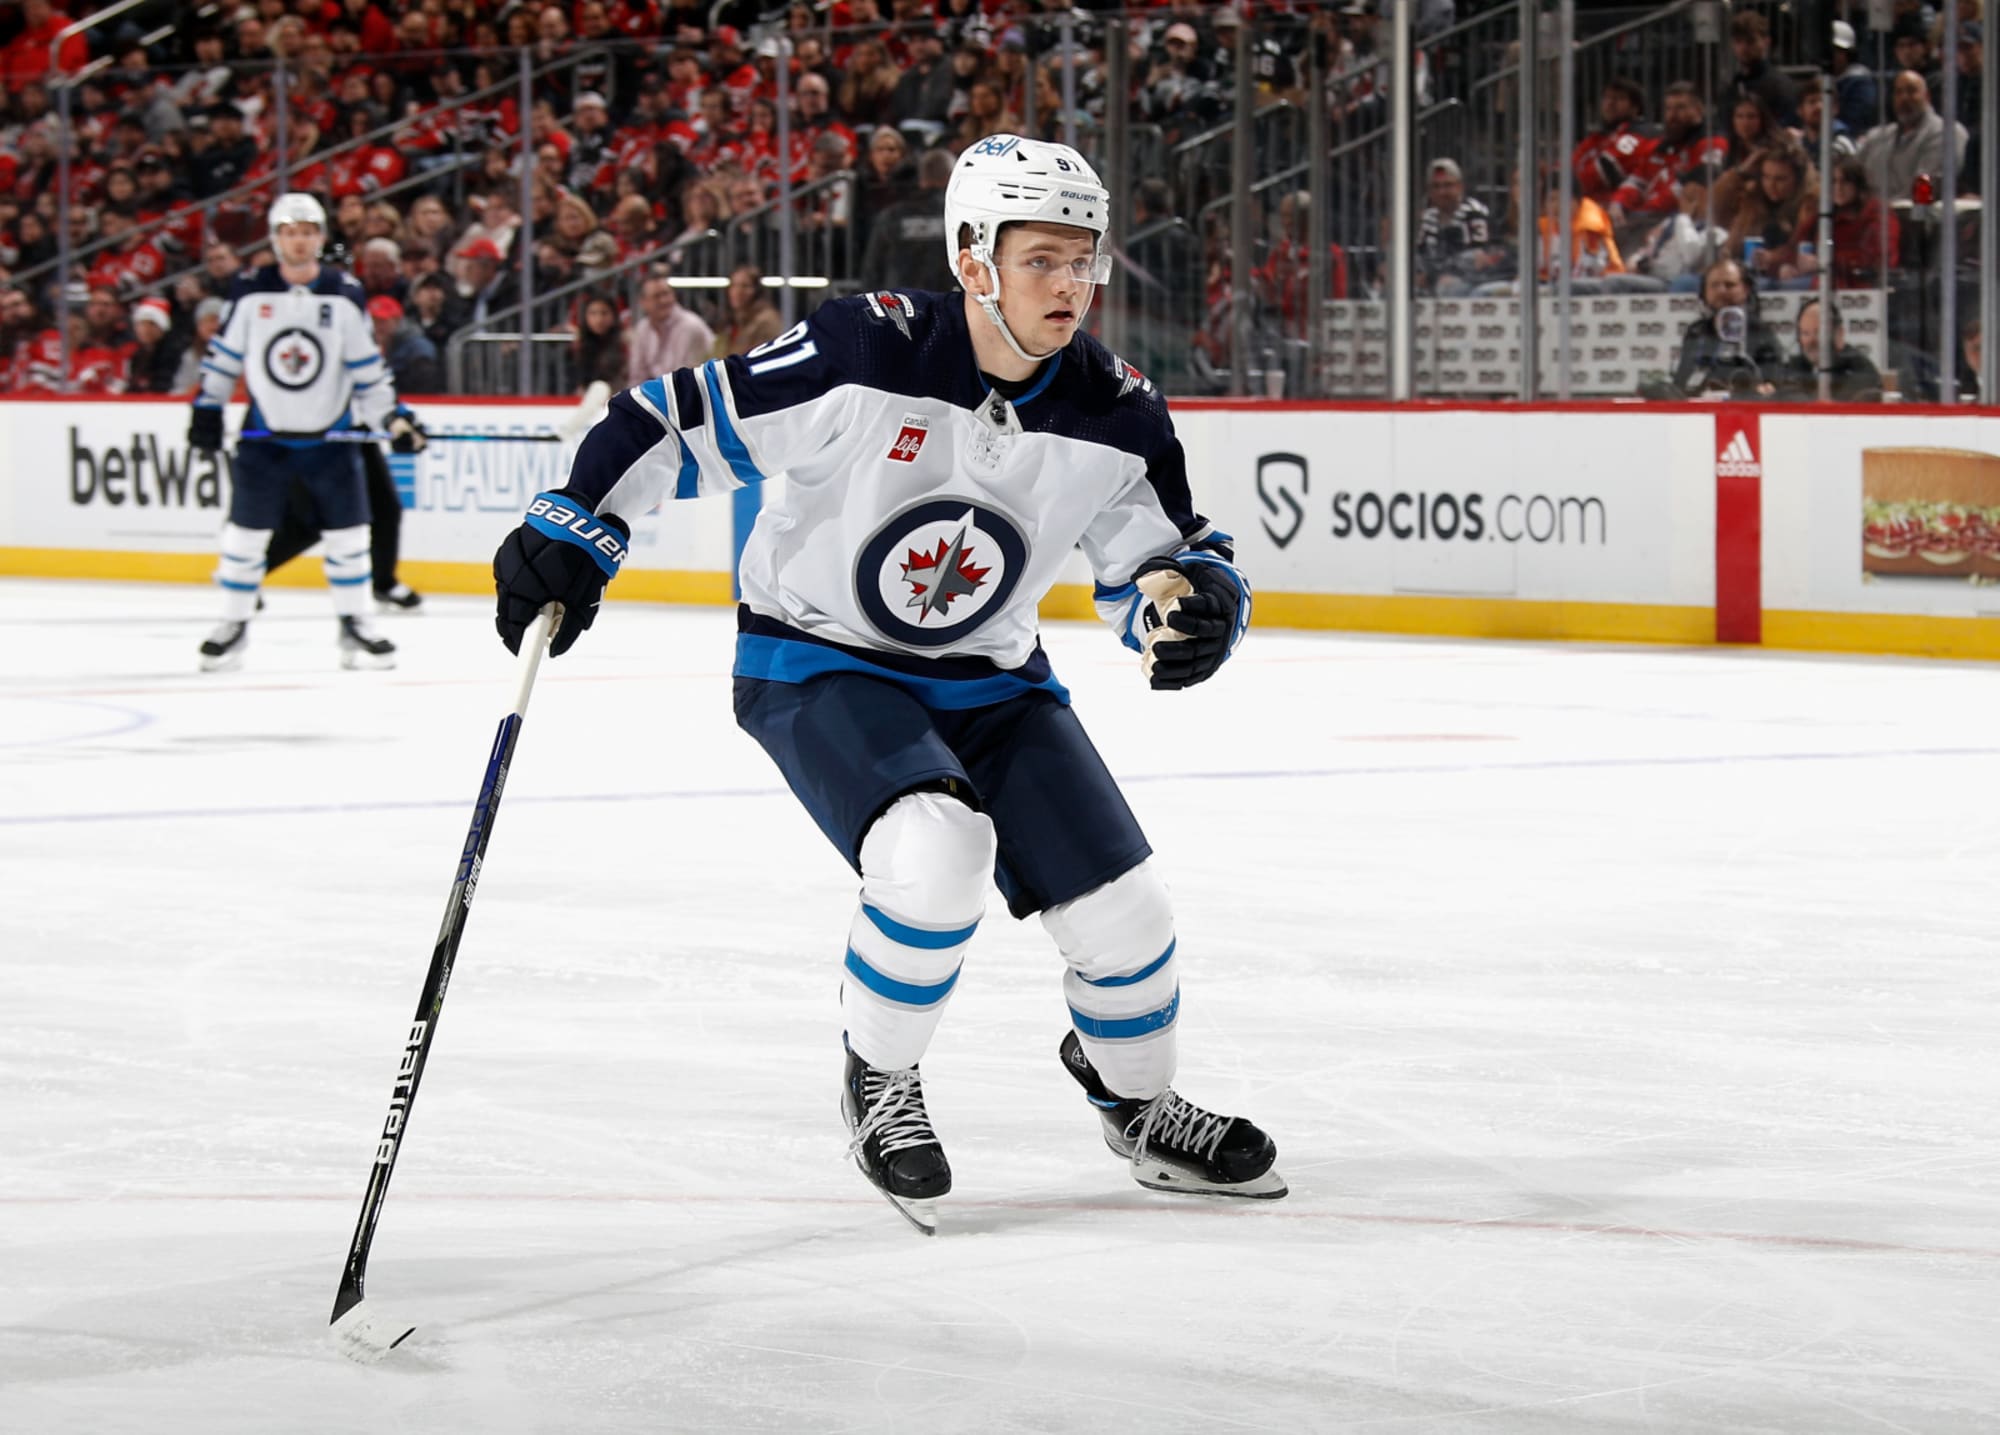 What Cole Perfetti's return could mean for the Winnipeg Jets